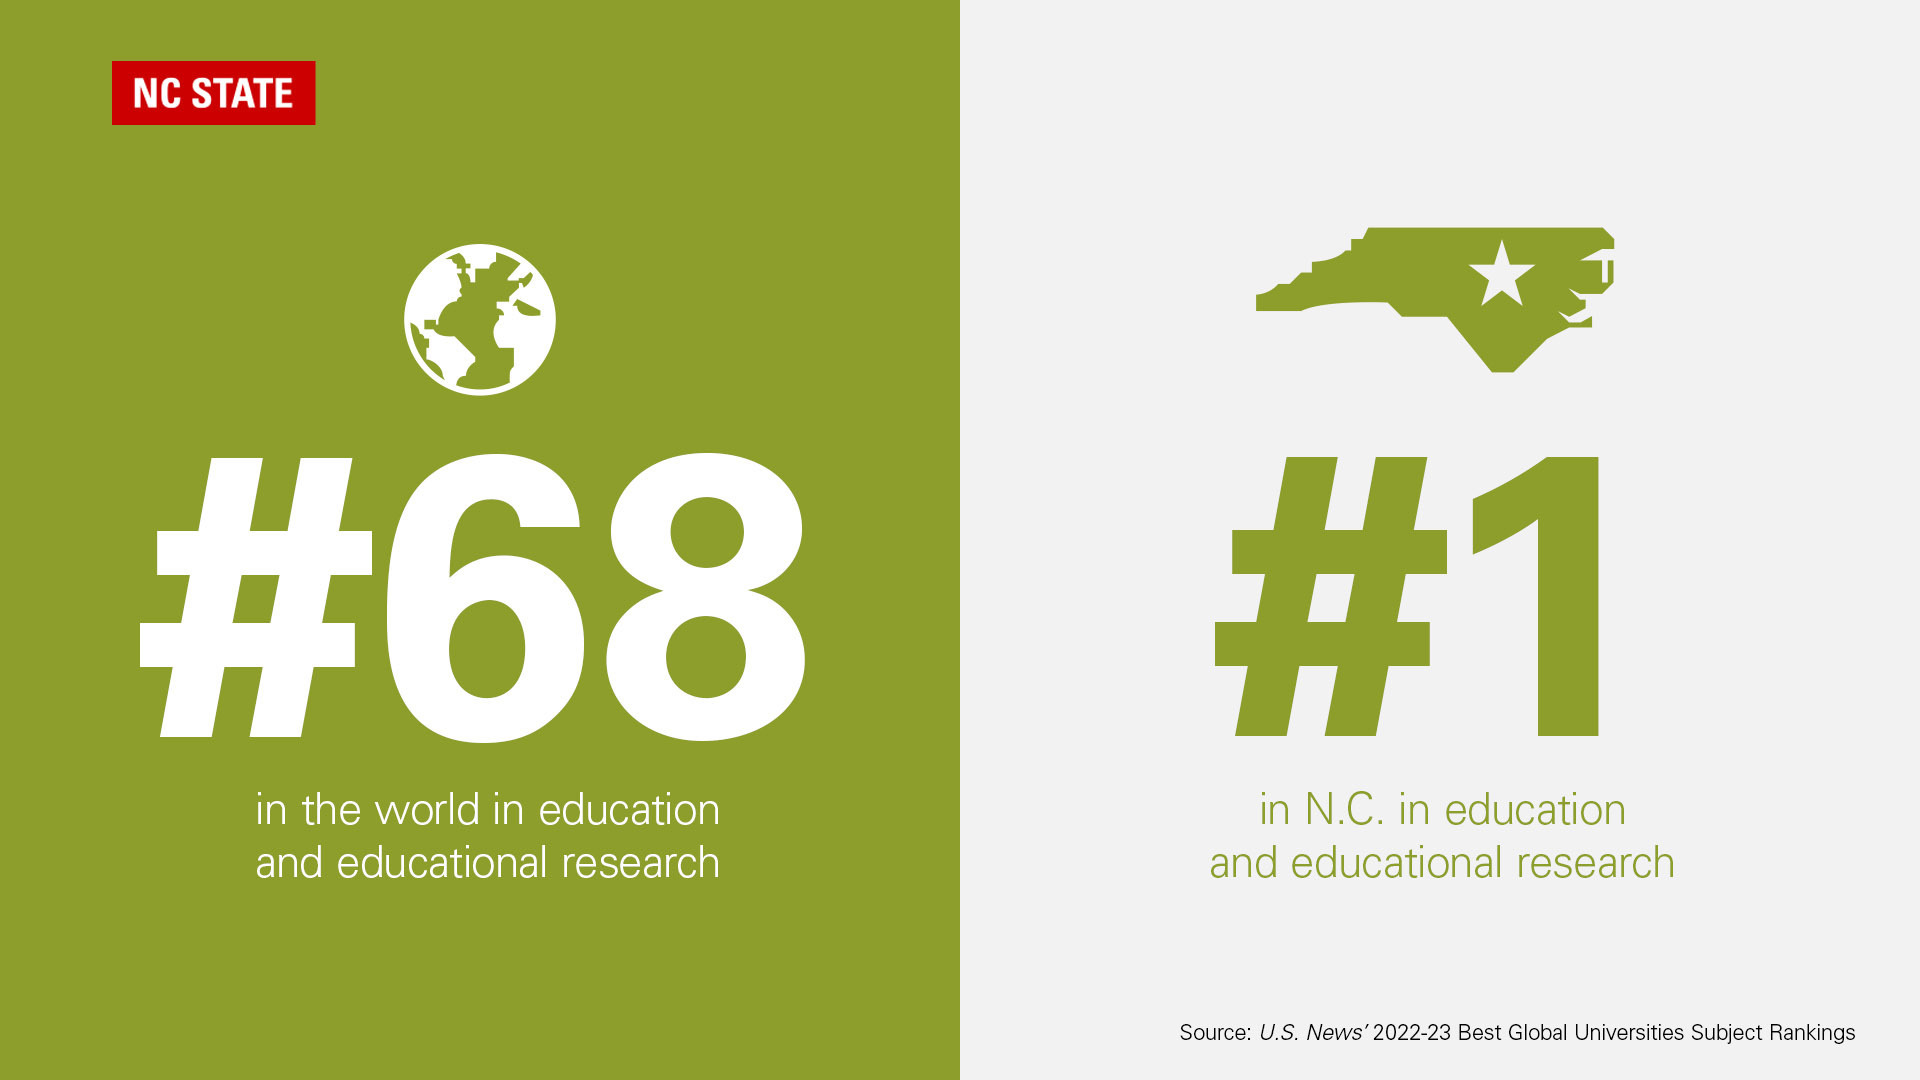 NC State ranked #68 in the nation and #1 in North Carolina for education and educational research